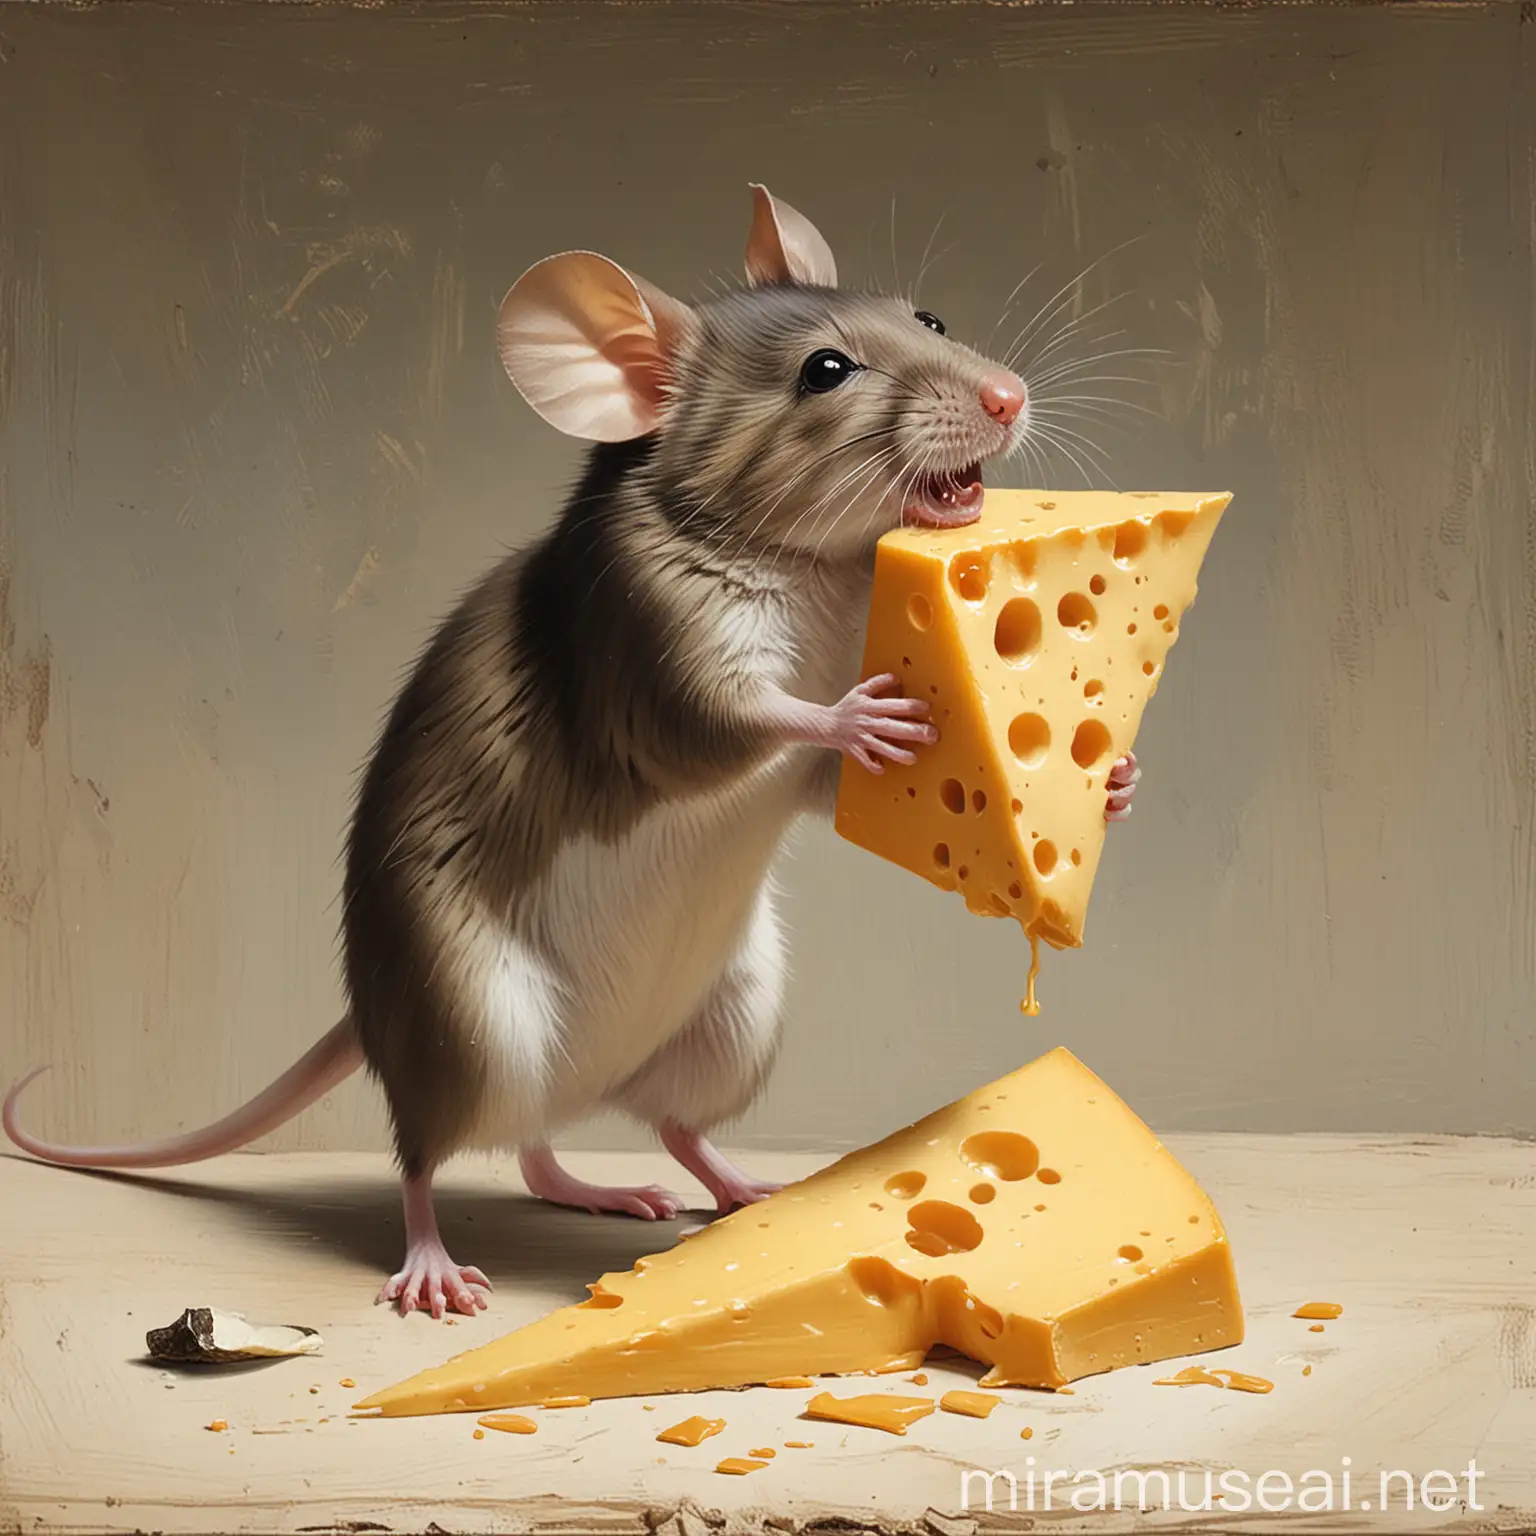 A painting of a mouse standing up and biting into a wedge of cheese